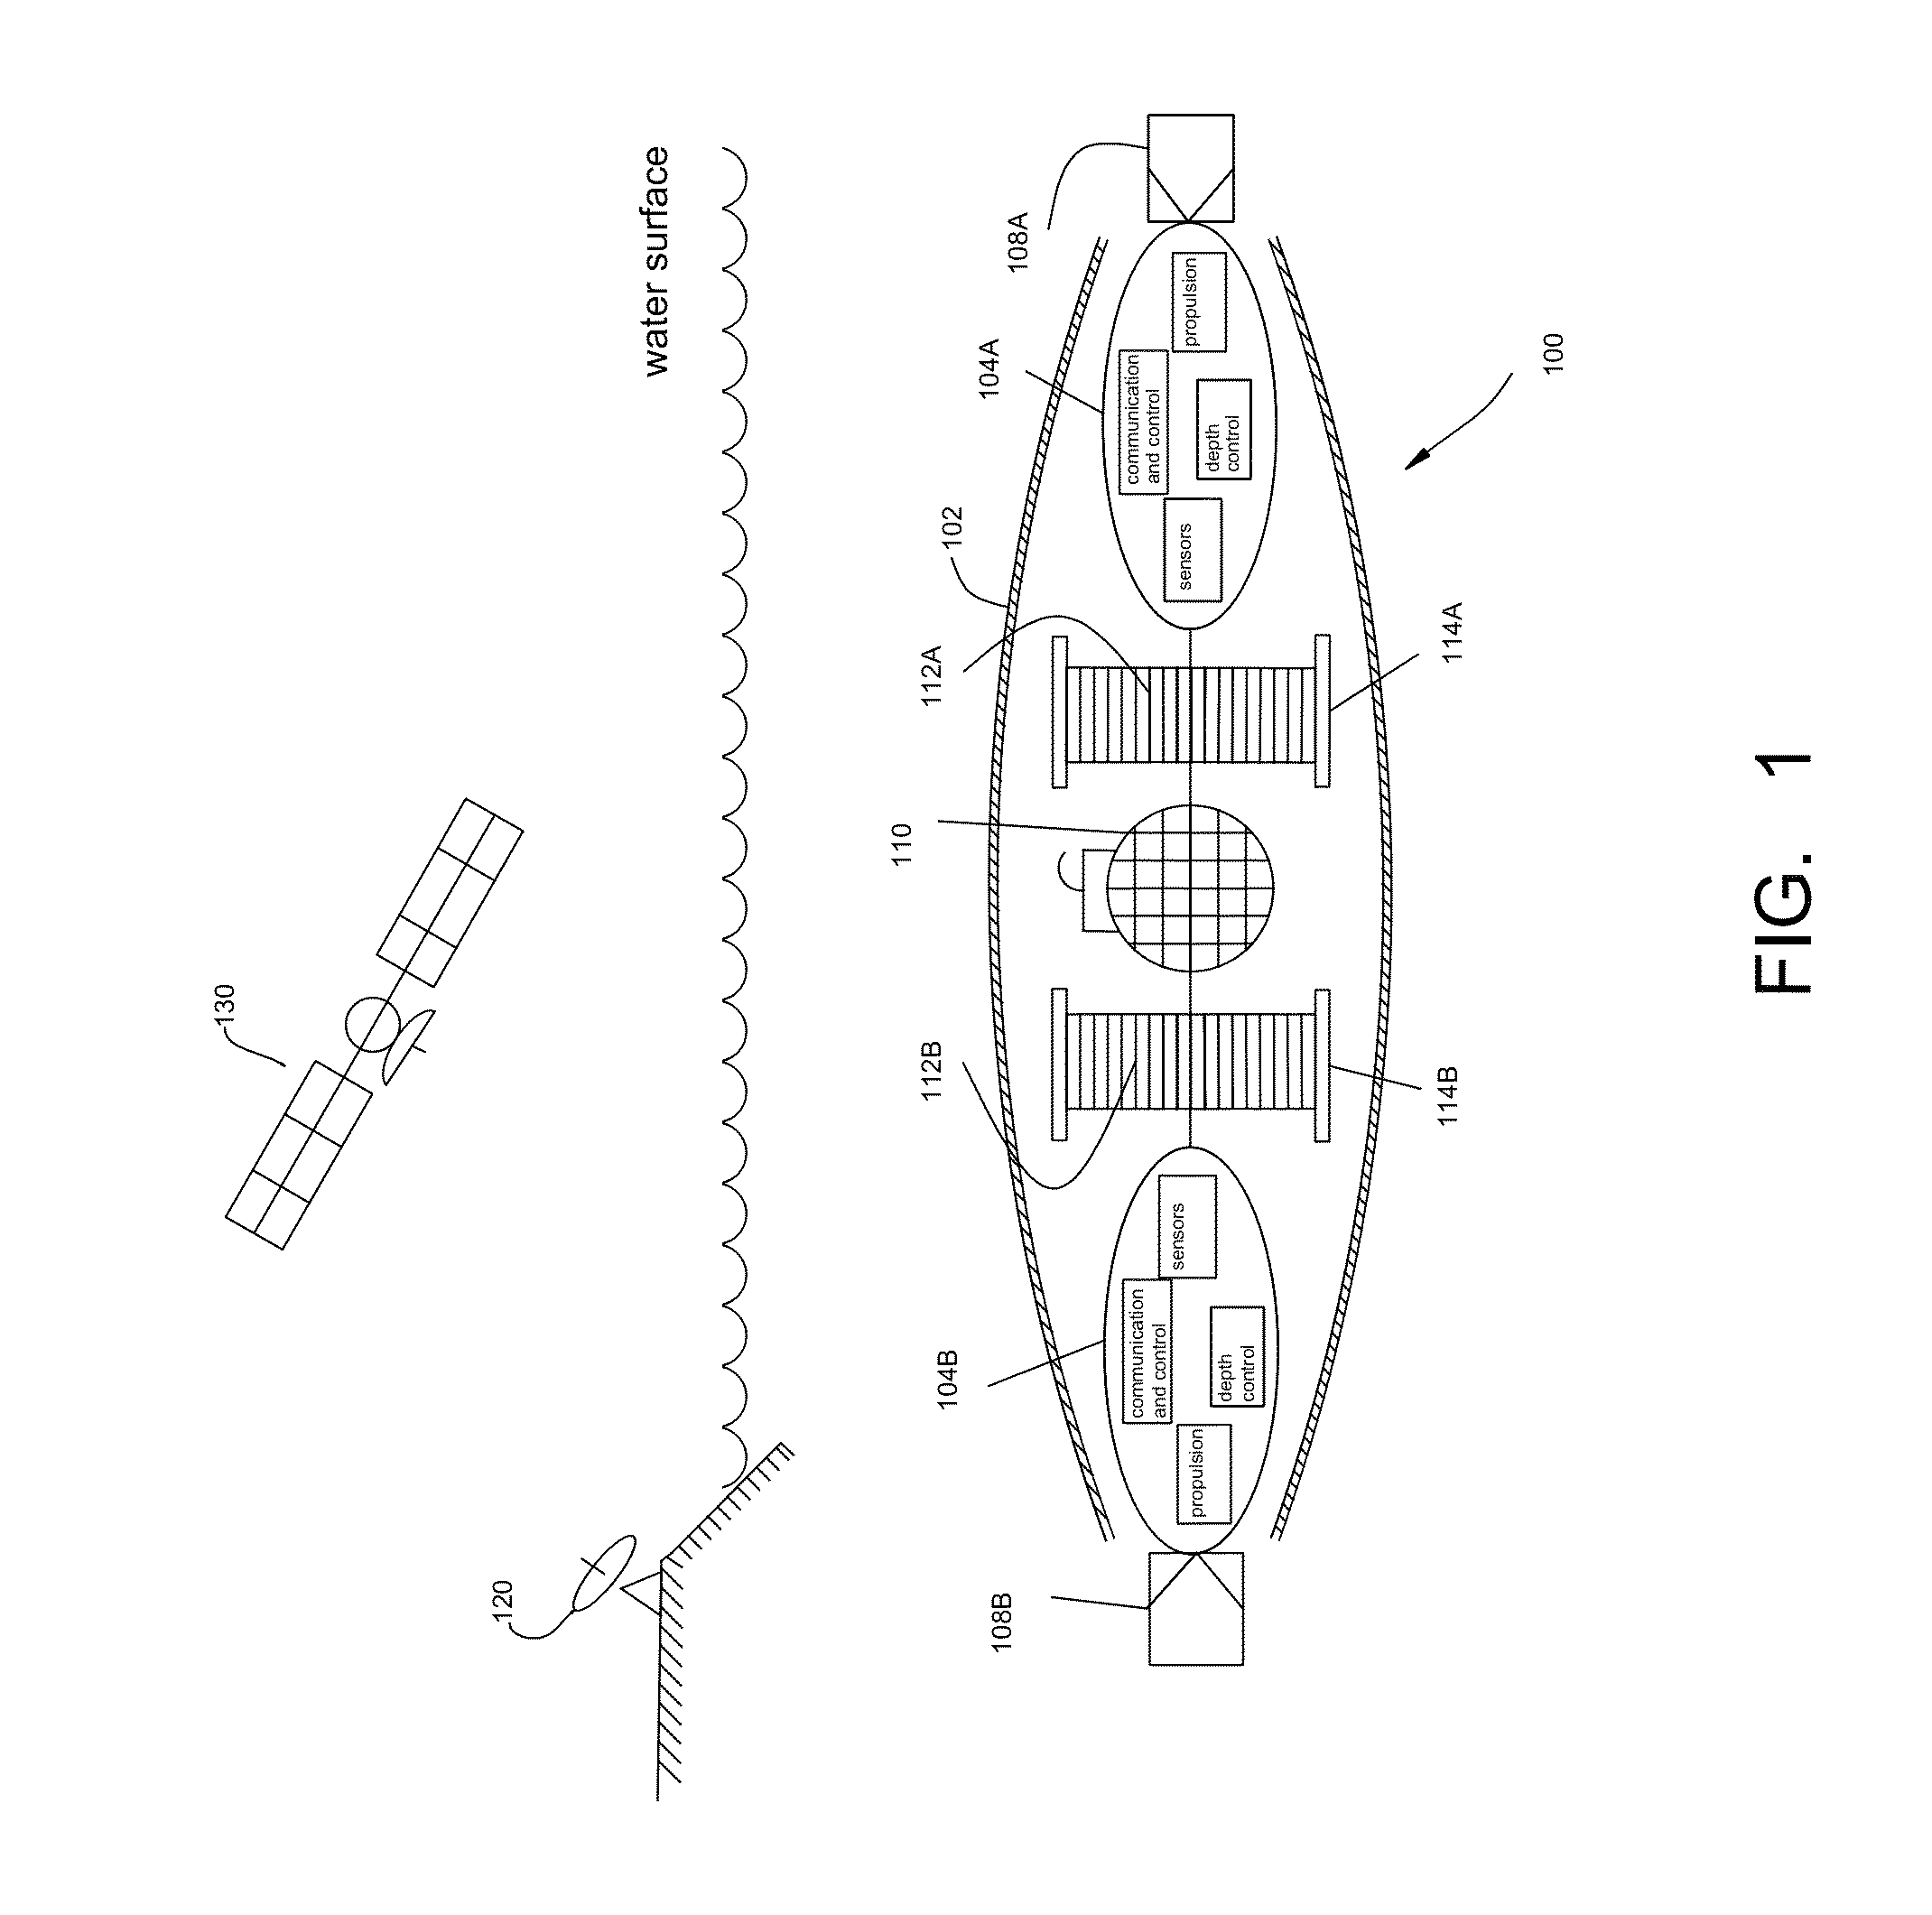 System and methods of using unmanned underwater vehicles (UUVs) along with tethers and tethered devices